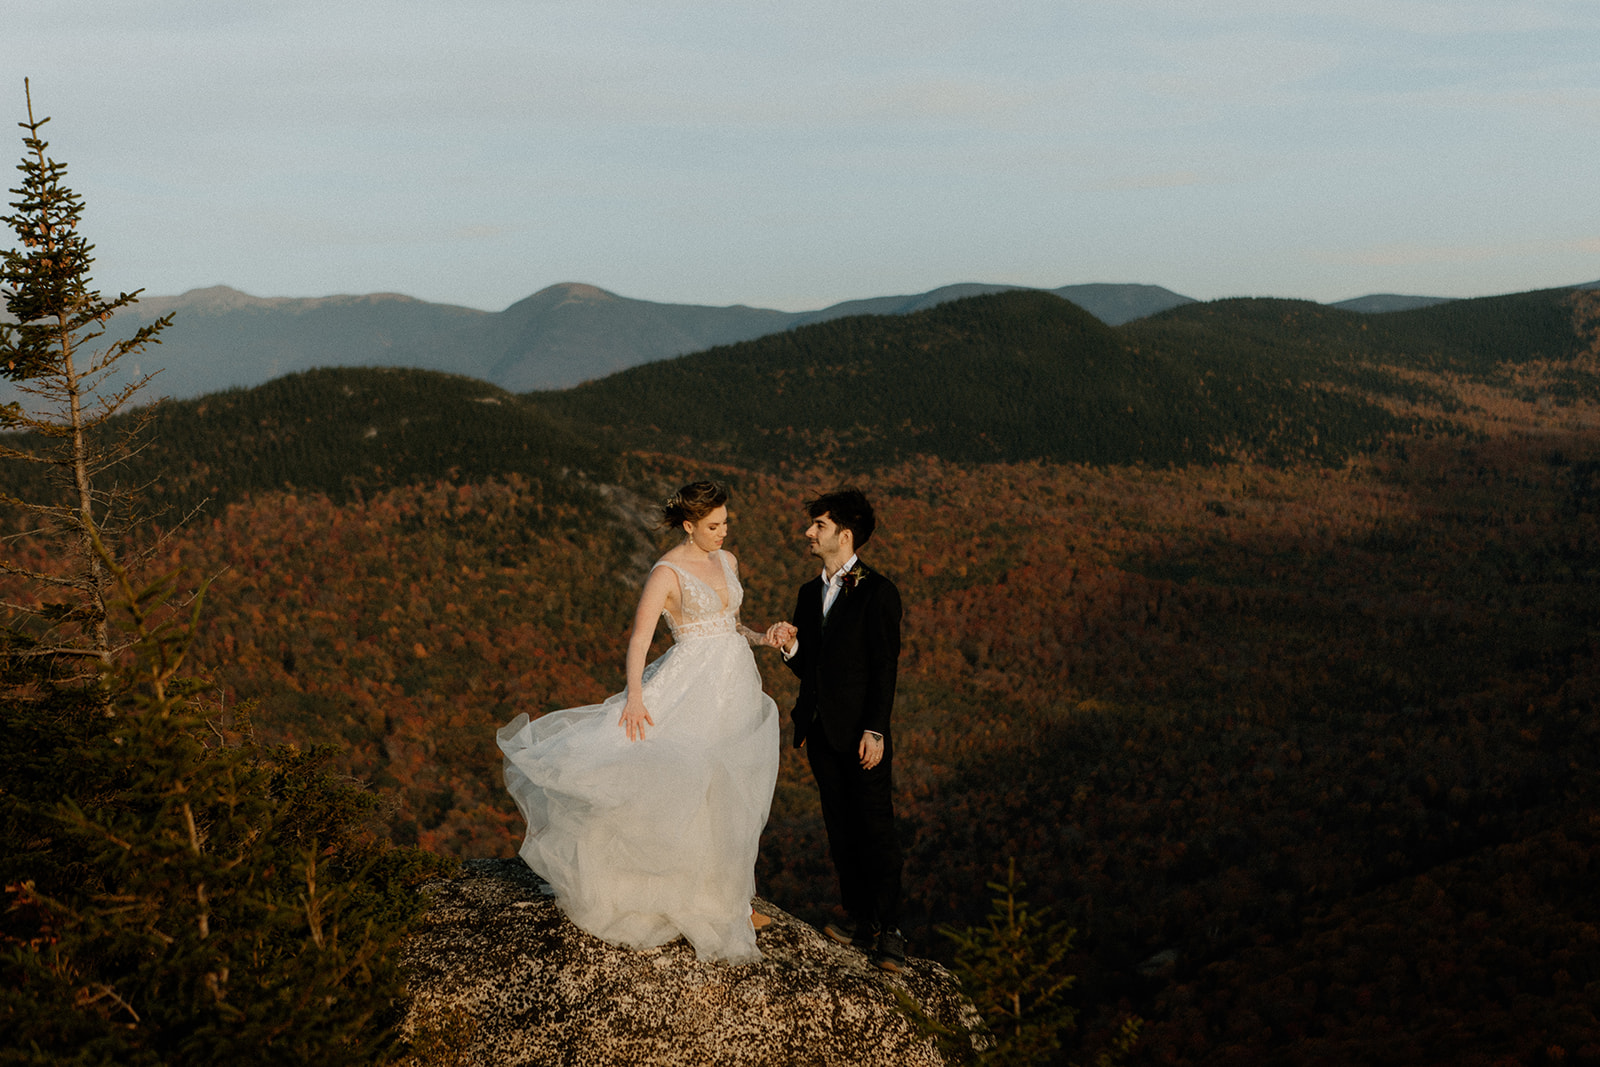 Middle Sugarloaf sunset elopement in the White MountainsNew Hampshire